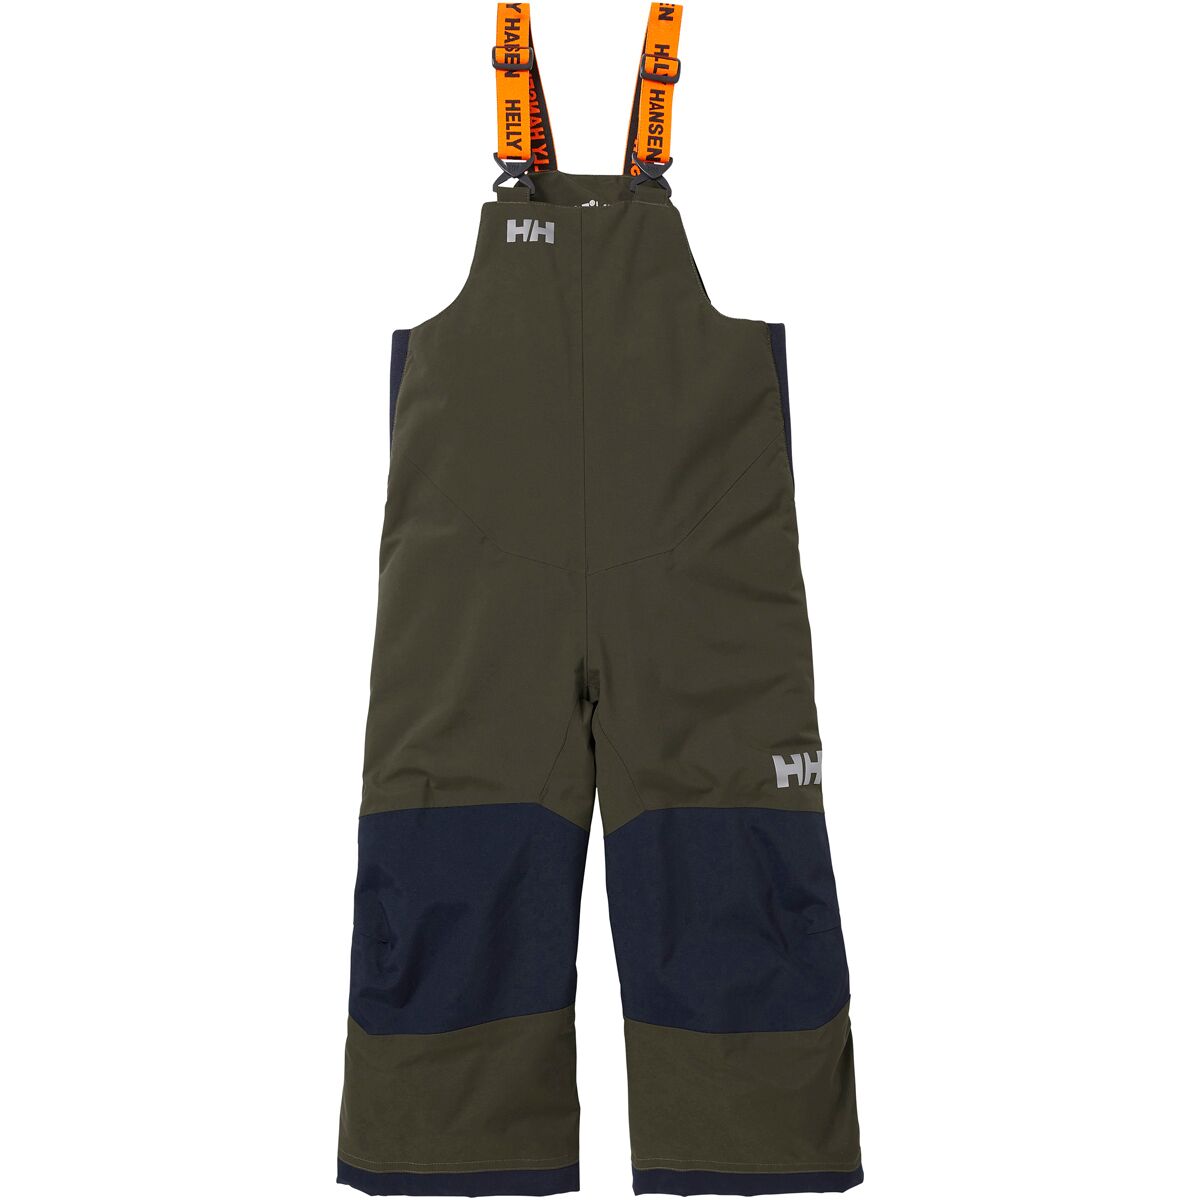 Helly Hansen Rider 2 Insulated Bib Pant - Toddlers' | Backcountry